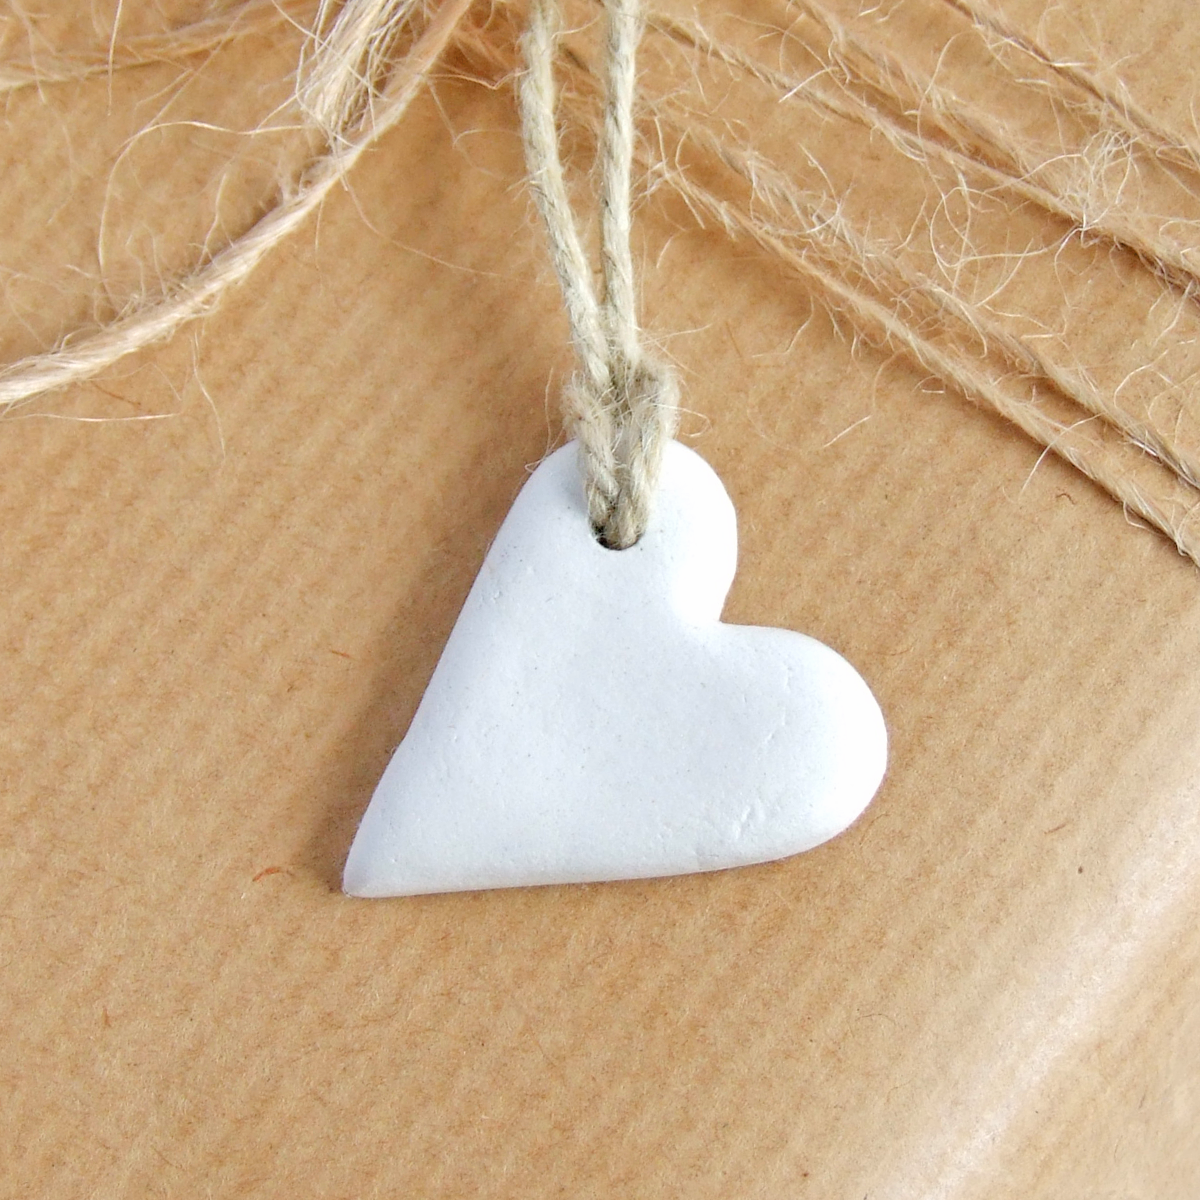 Handmade white clay mini heart gift tags or favors by Bonschelle